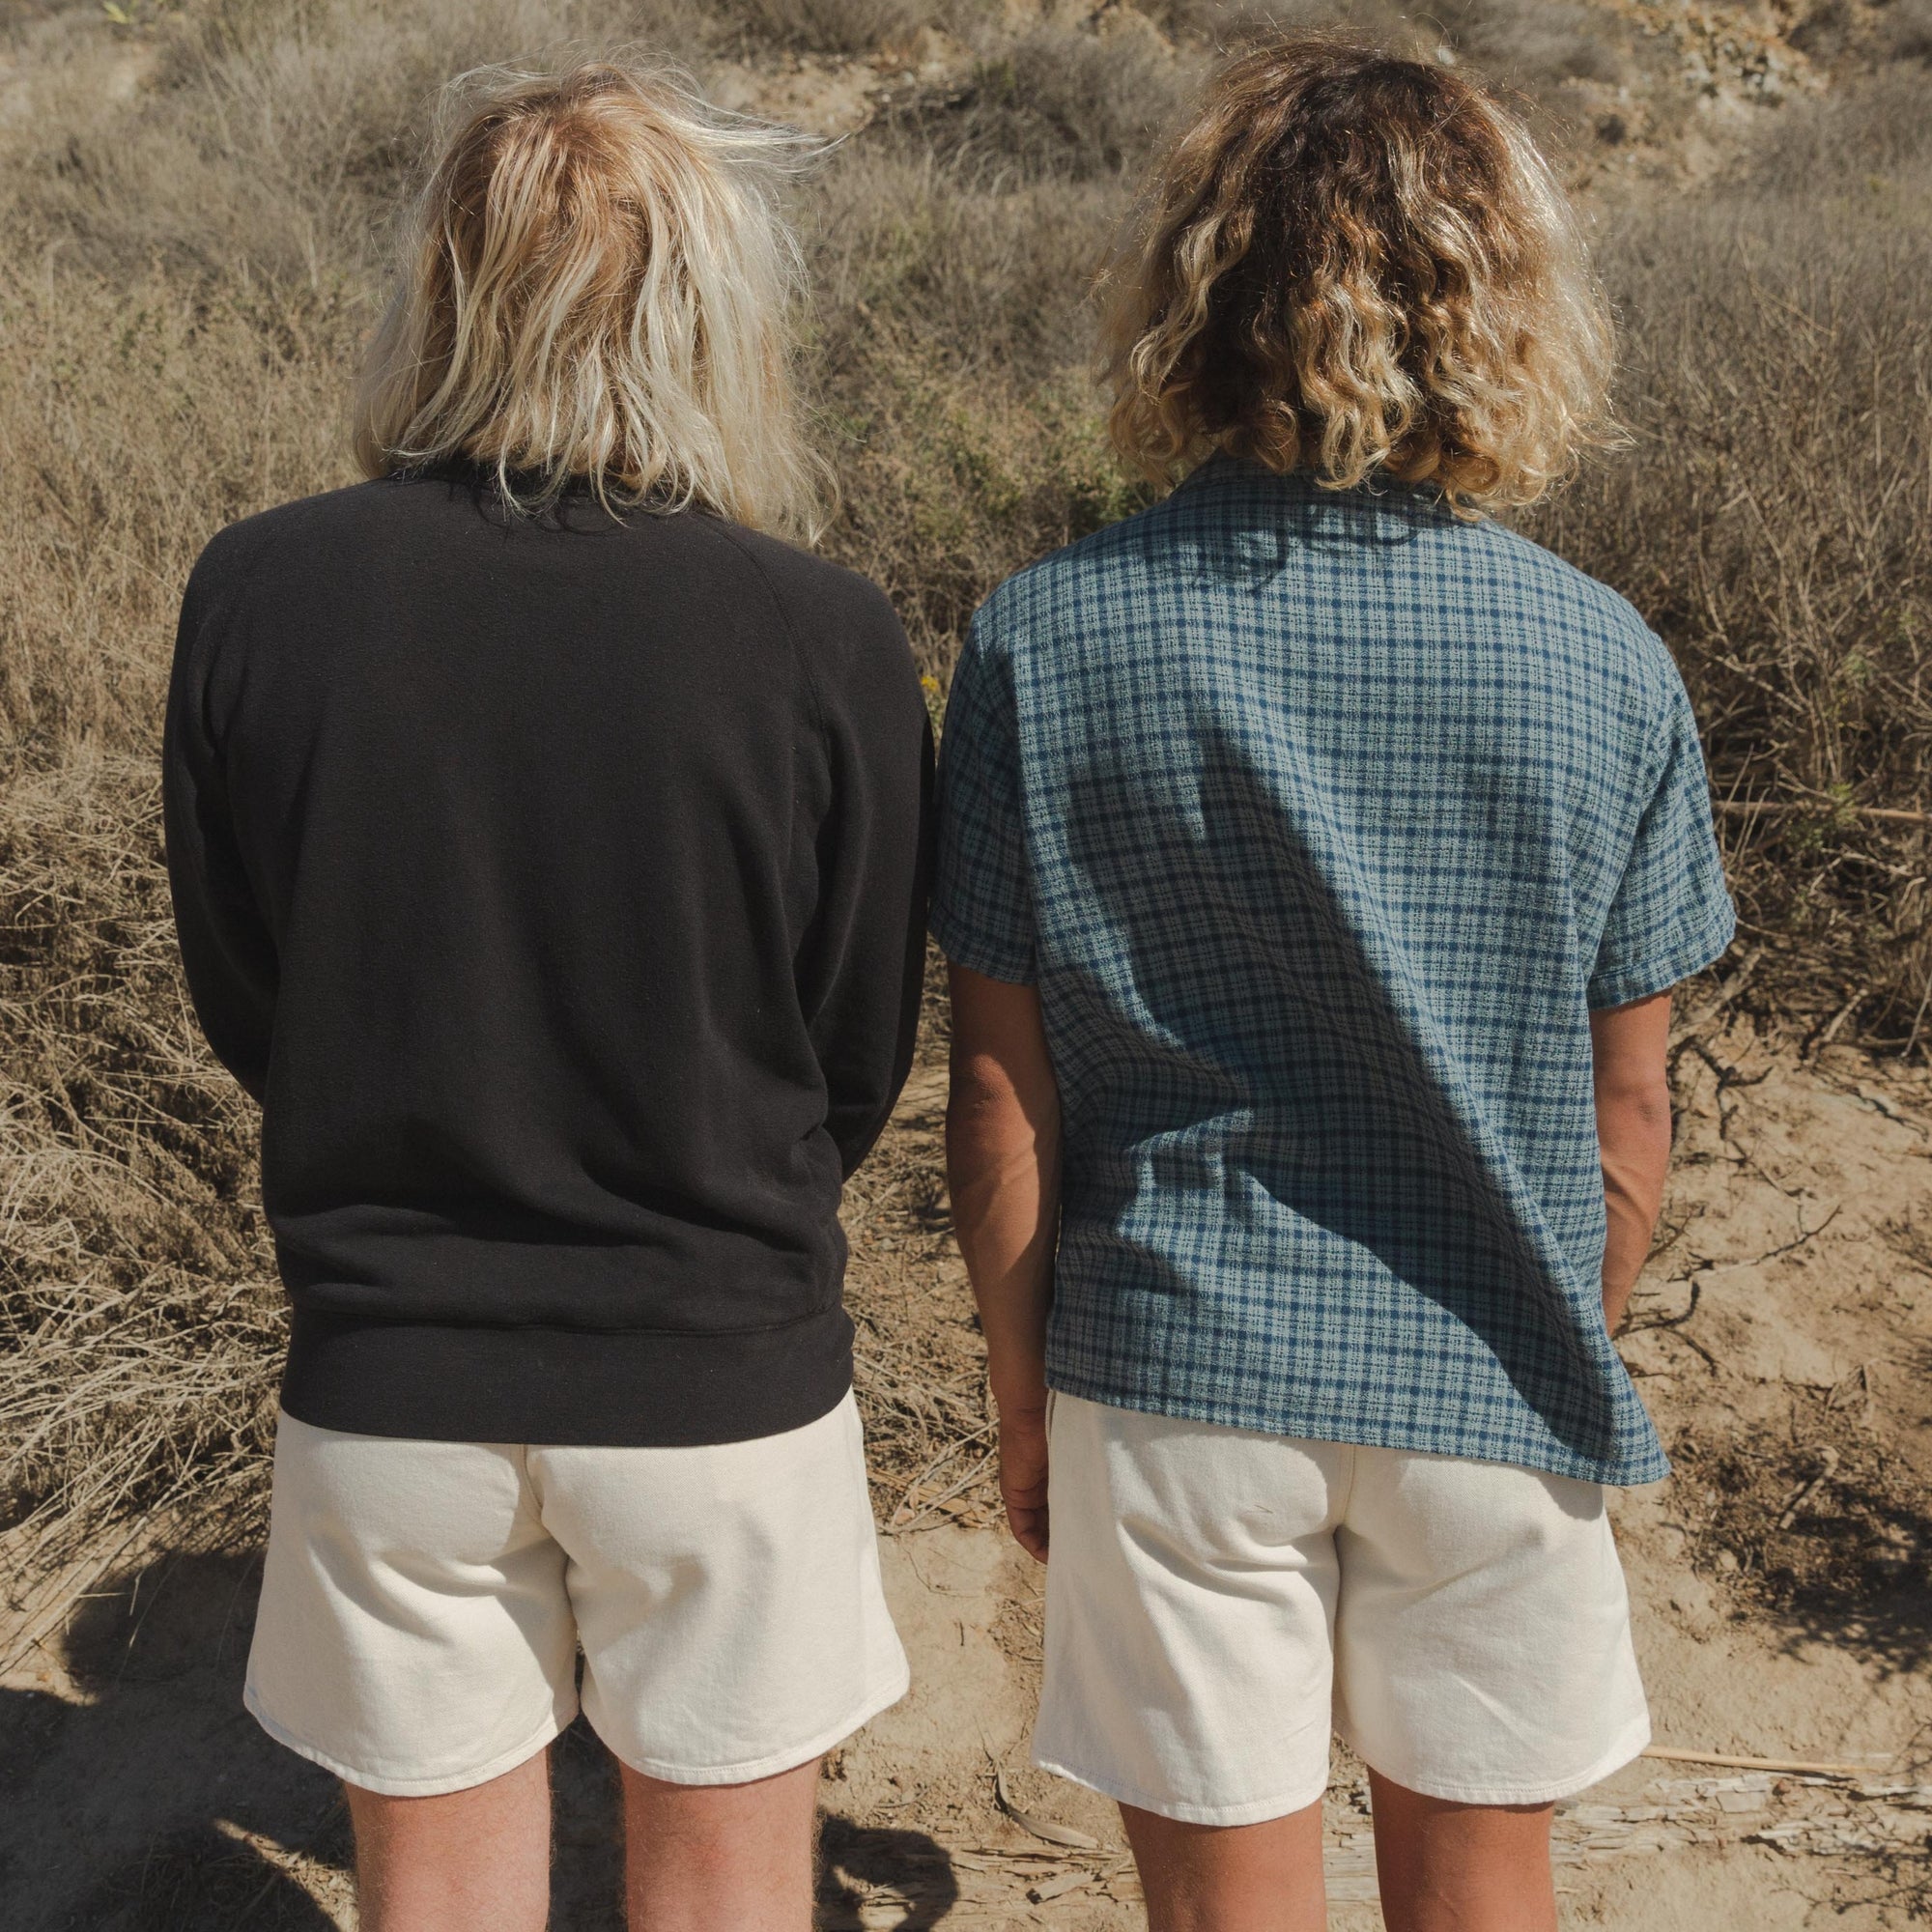 Two People wearing Mens Cotton Canvas Shorts in White and One Wearing Plaid Button-Up Shirt in Blue, Backside